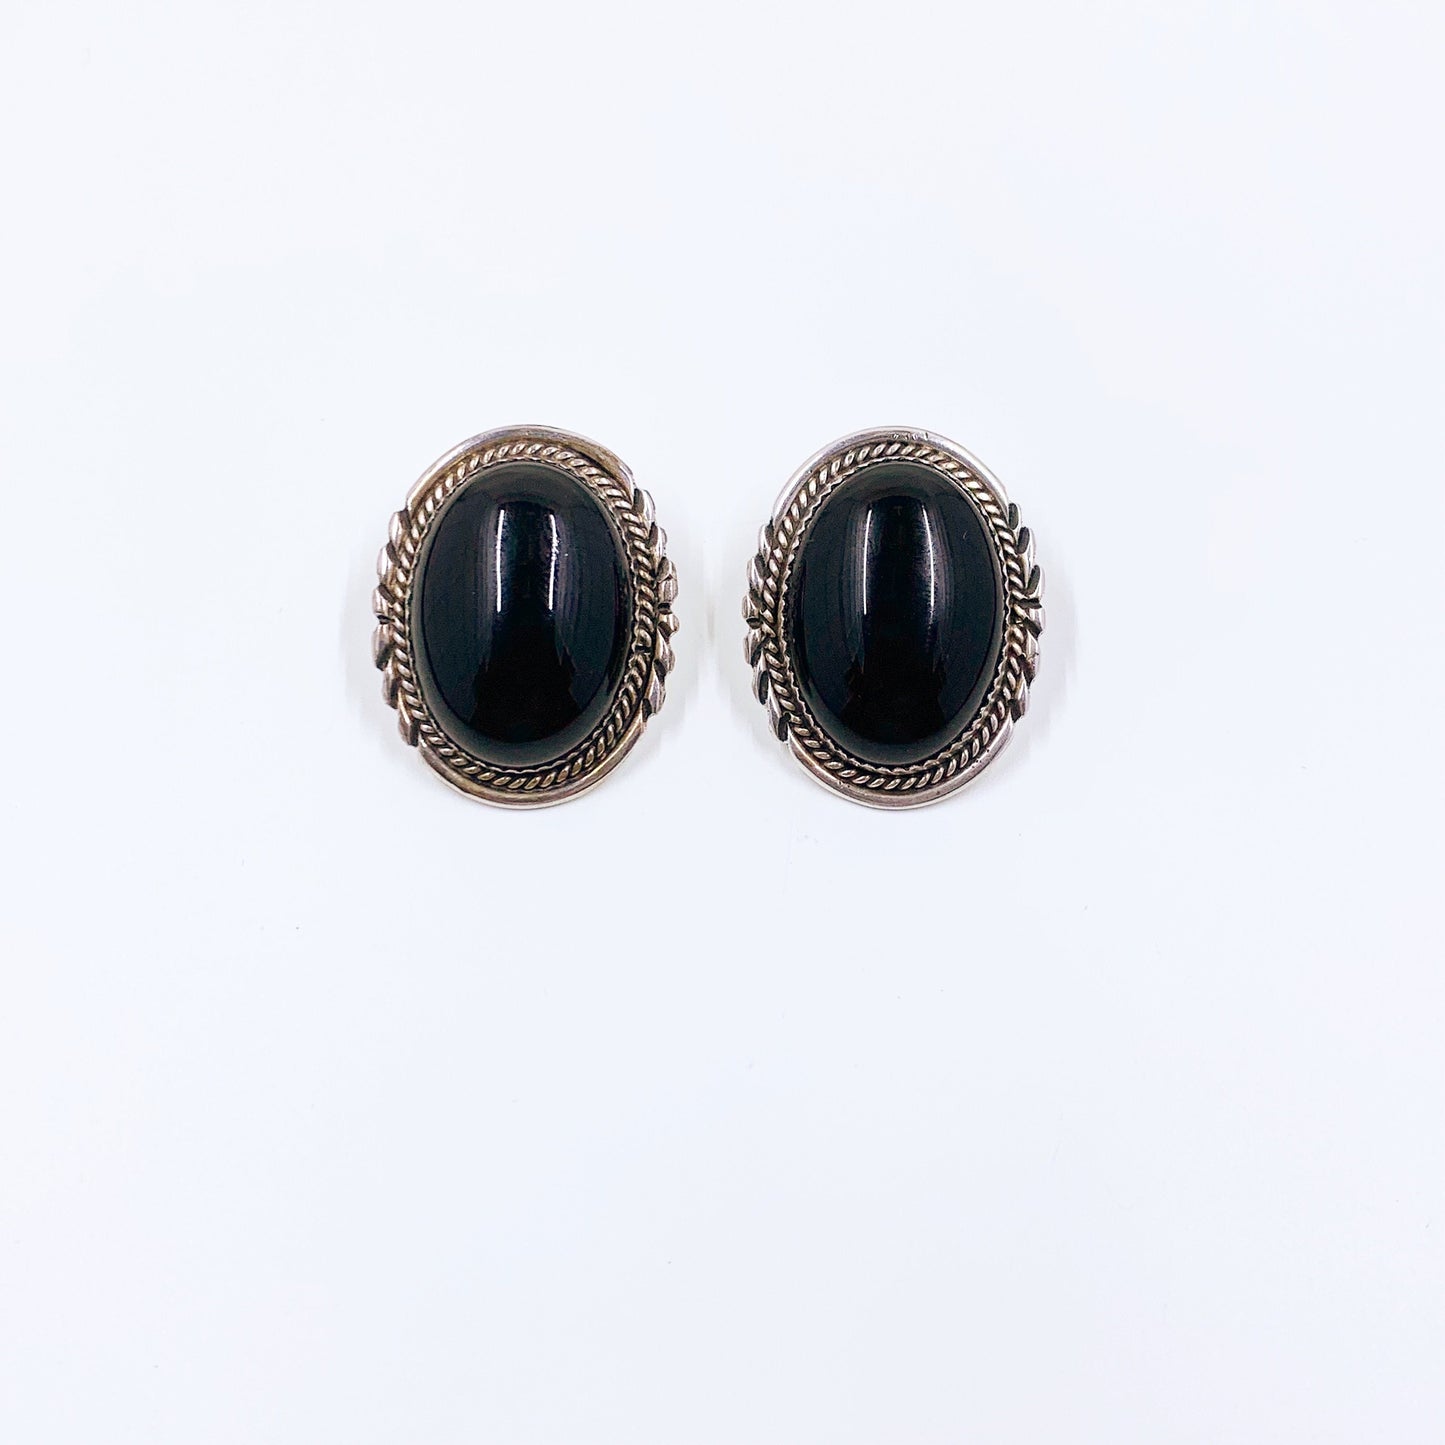 Vintage Silver Large Oval Onyx Earrings | Signed L. Spencer Native American Onyx Earrings | Black Onyx Large Studs